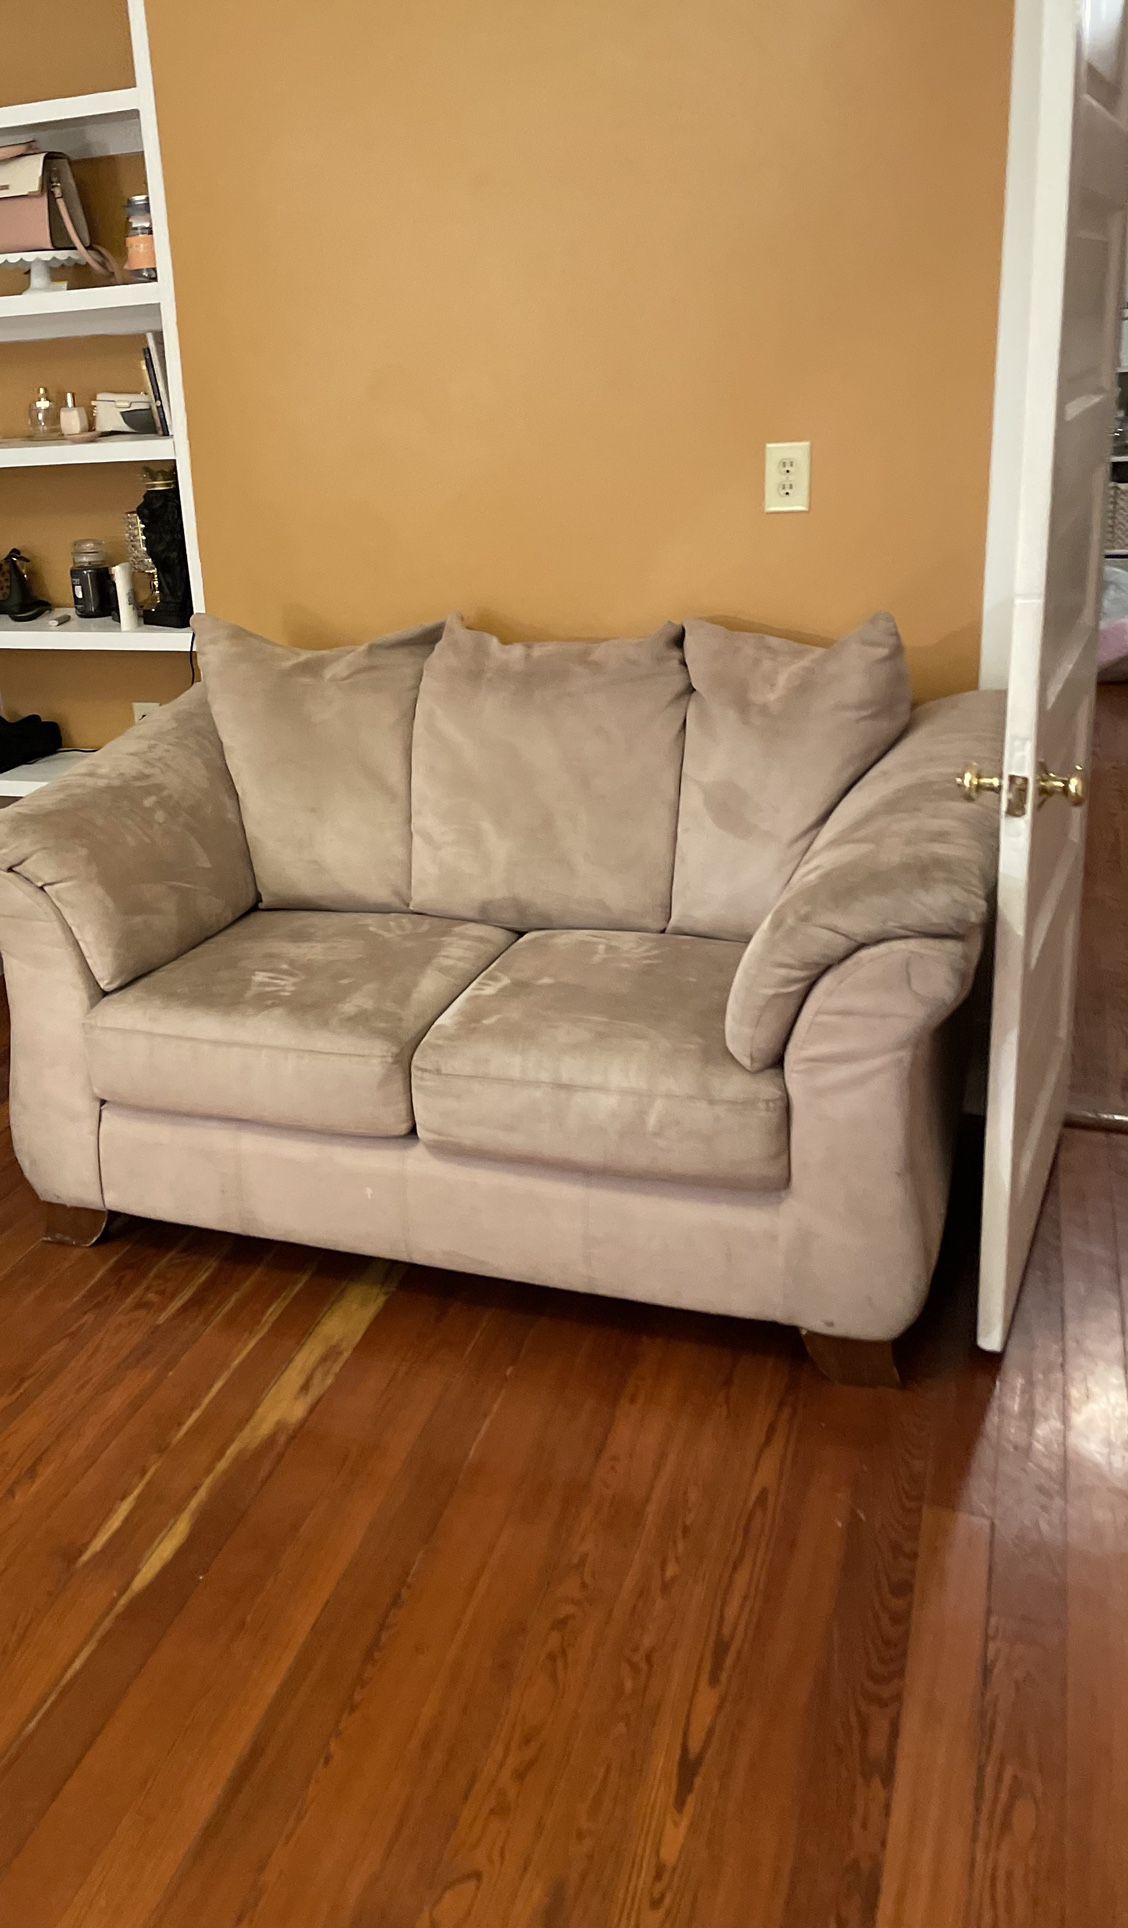 Loveseat Small Couch 